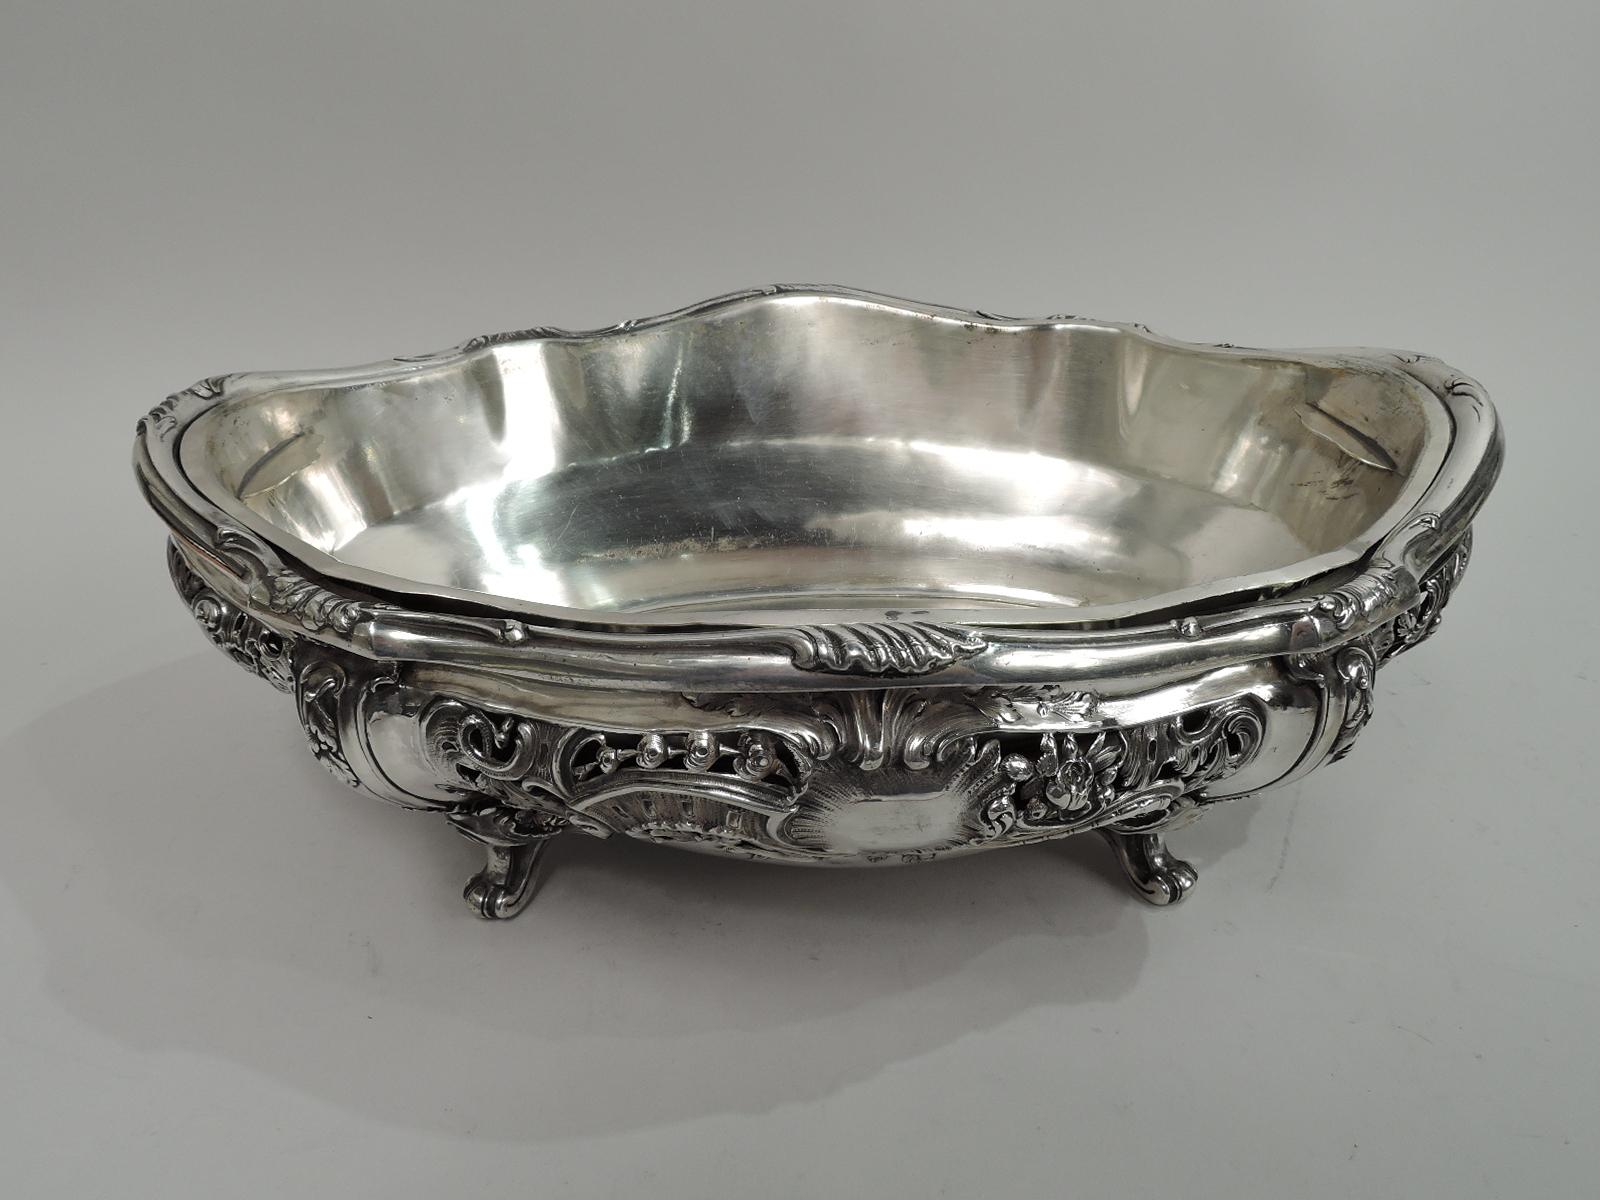 Belle Epoque Rococo 950 silver jardiniere. Made by Edmond Tetard in Paris, ca 1890. Shaped oval well. Bellied and open sides with flowers, leafing scrollwork and diaper. Four leaf and flower-mounted scroll supports. A fresh and dynamic centerpiece